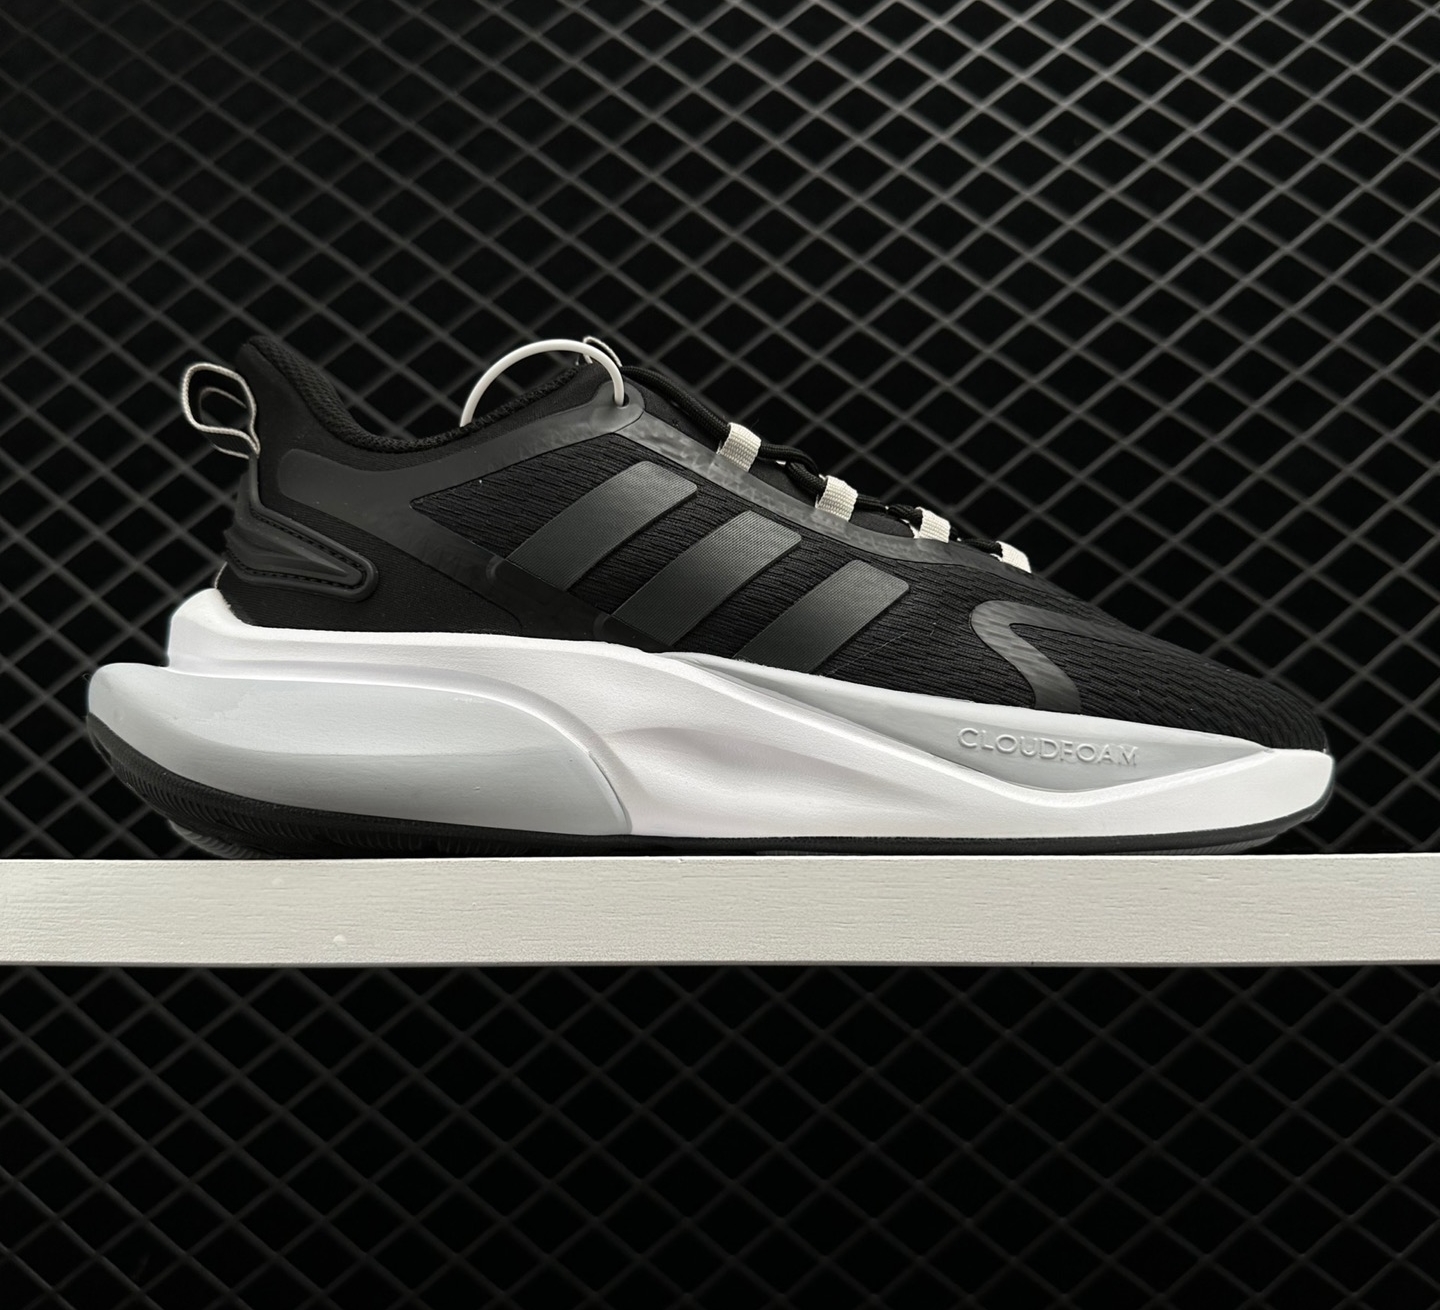 Adidas Alphabounce+ Black White Gray HP6144 - Premium Athletic Shoes